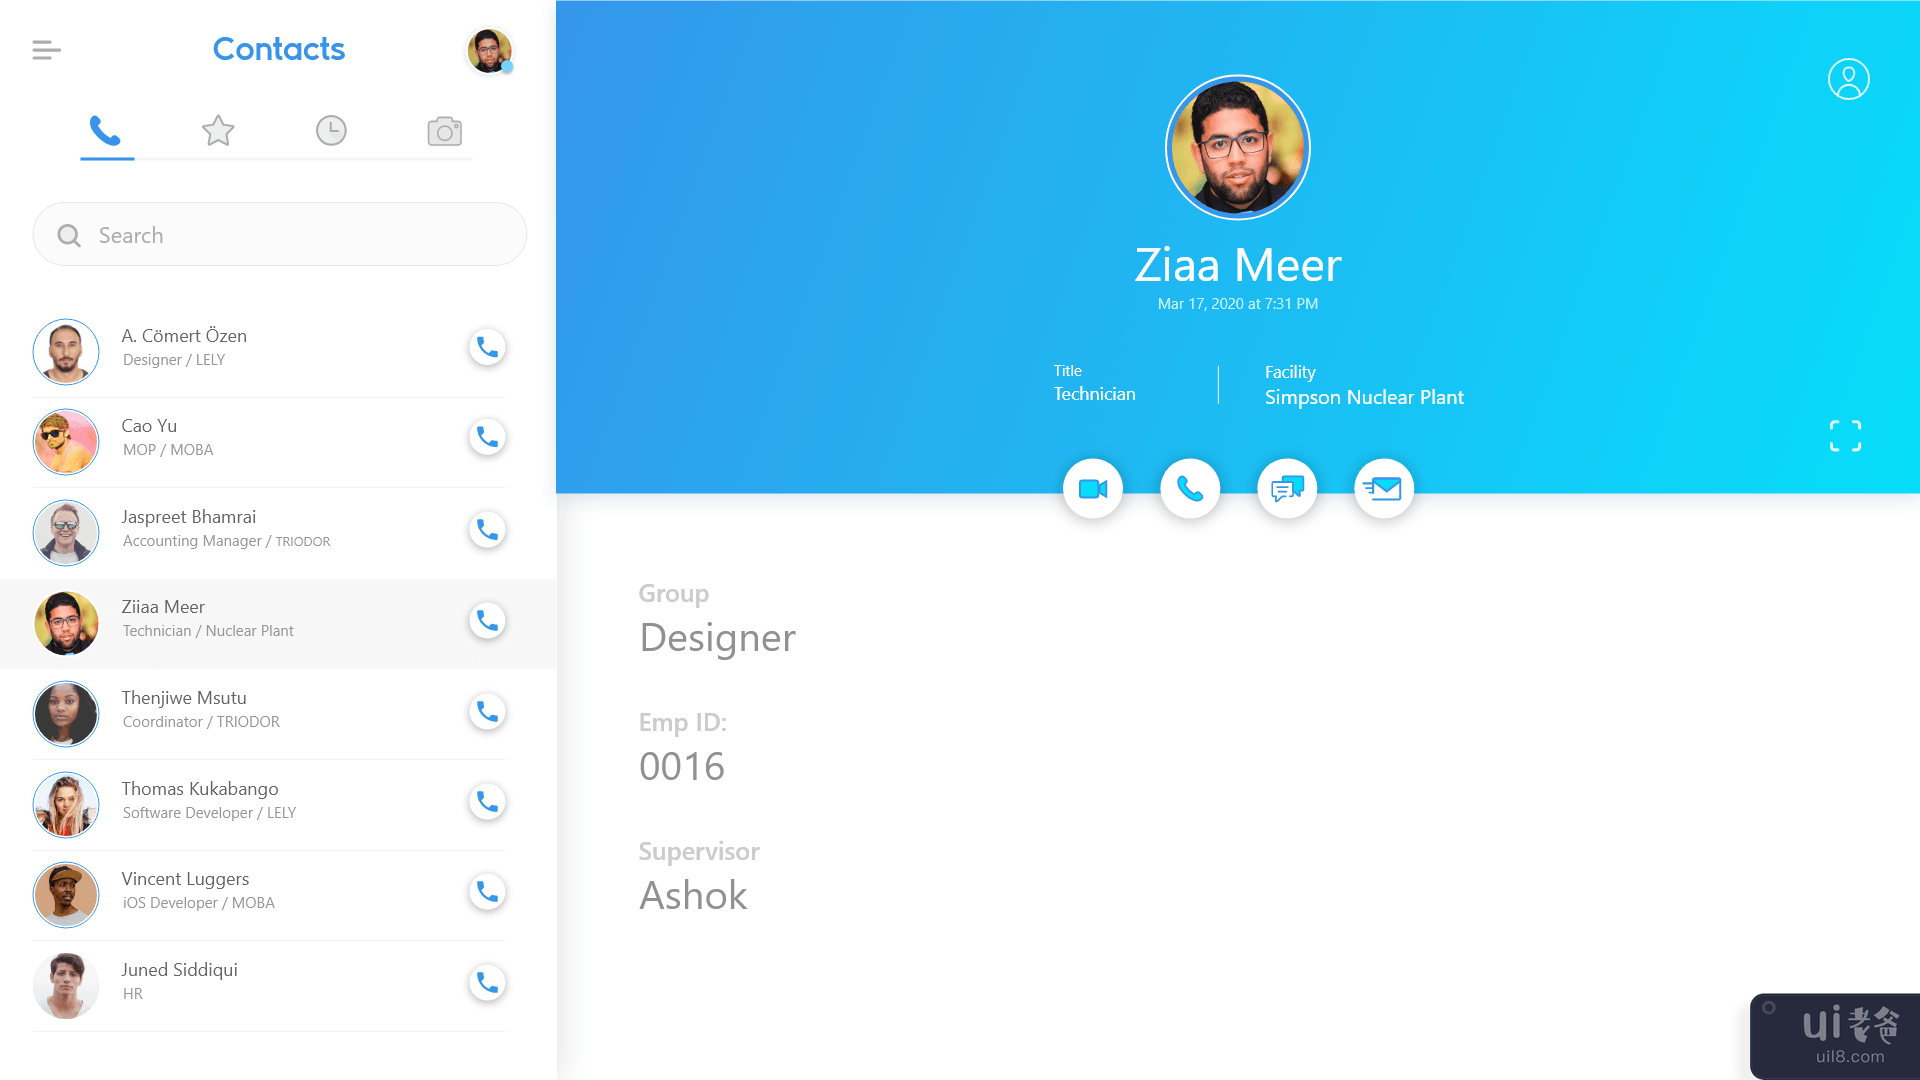 Zoom 和 Skype 之类的视频通话联系人消息传递(Zoom and Skype Like Video Call Contacts messaging)插图